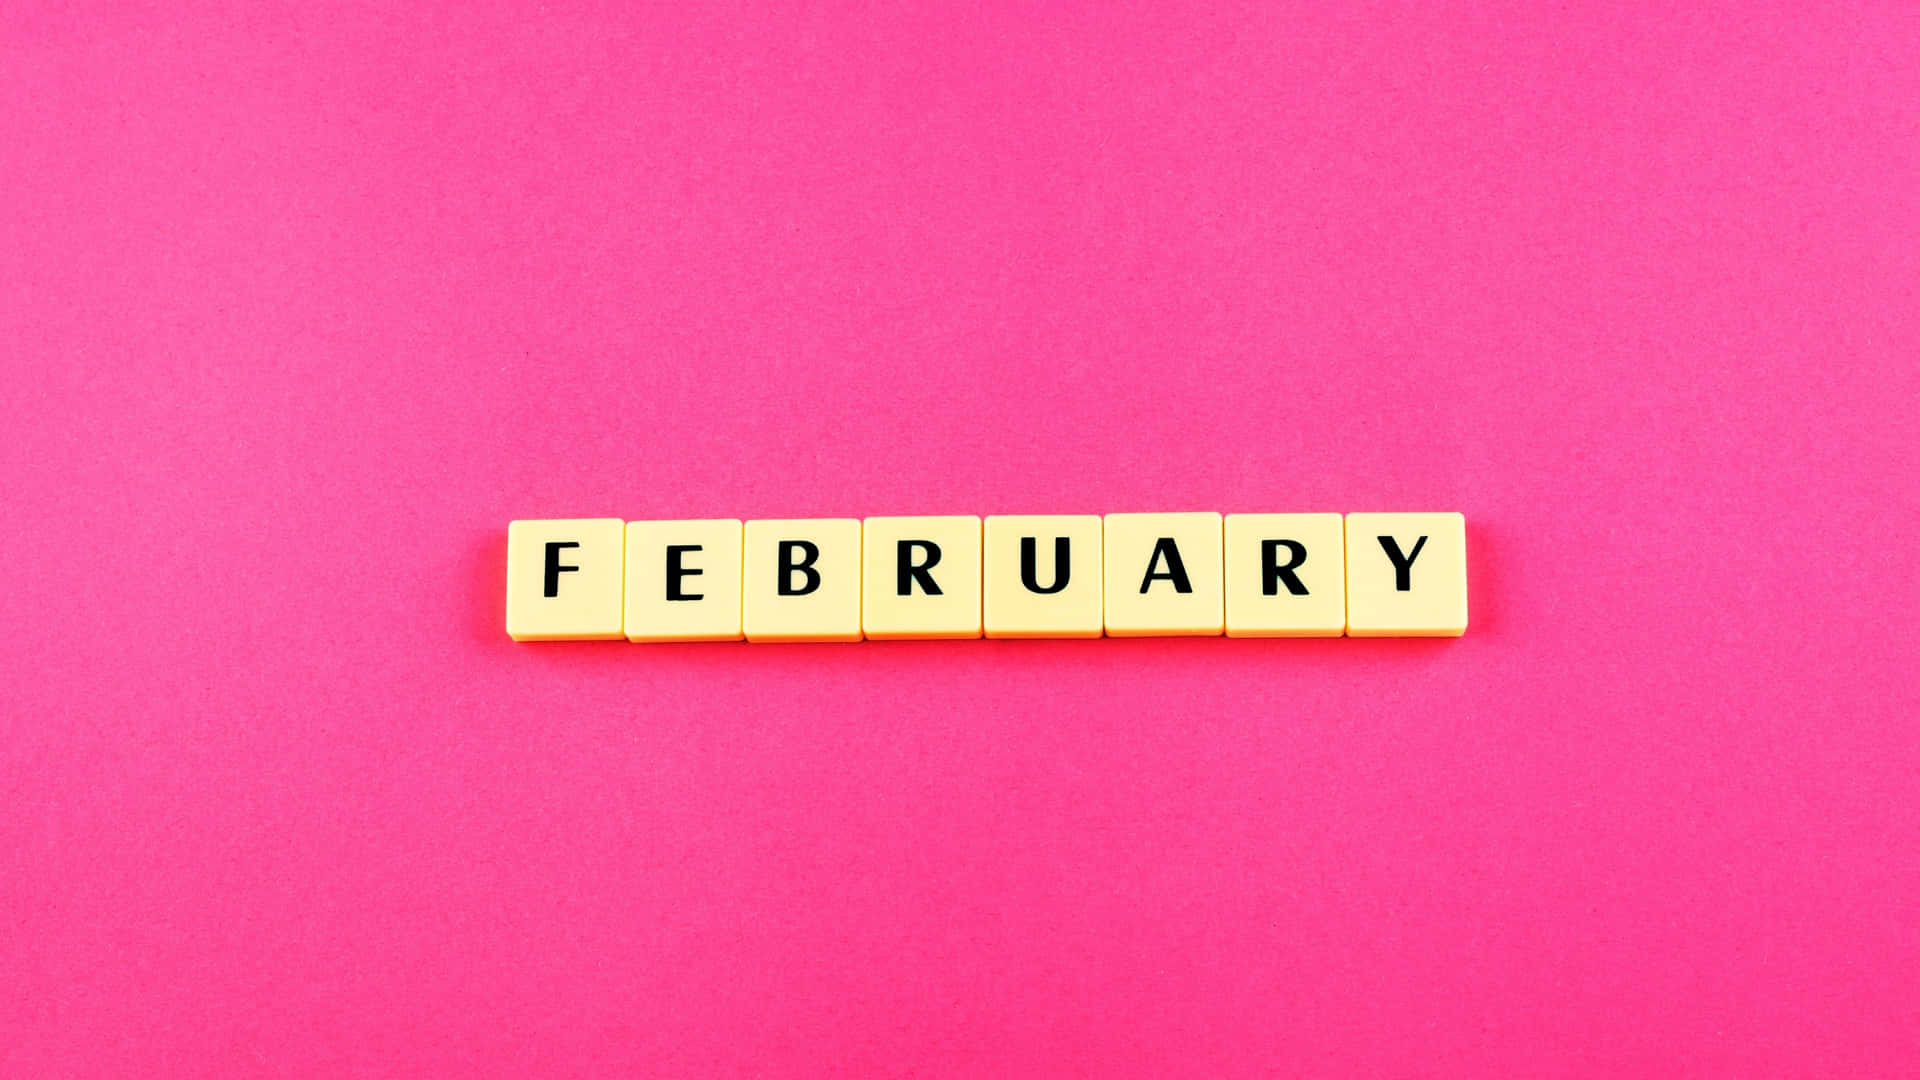 February Spelled Out Tiles Pink Background Wallpaper